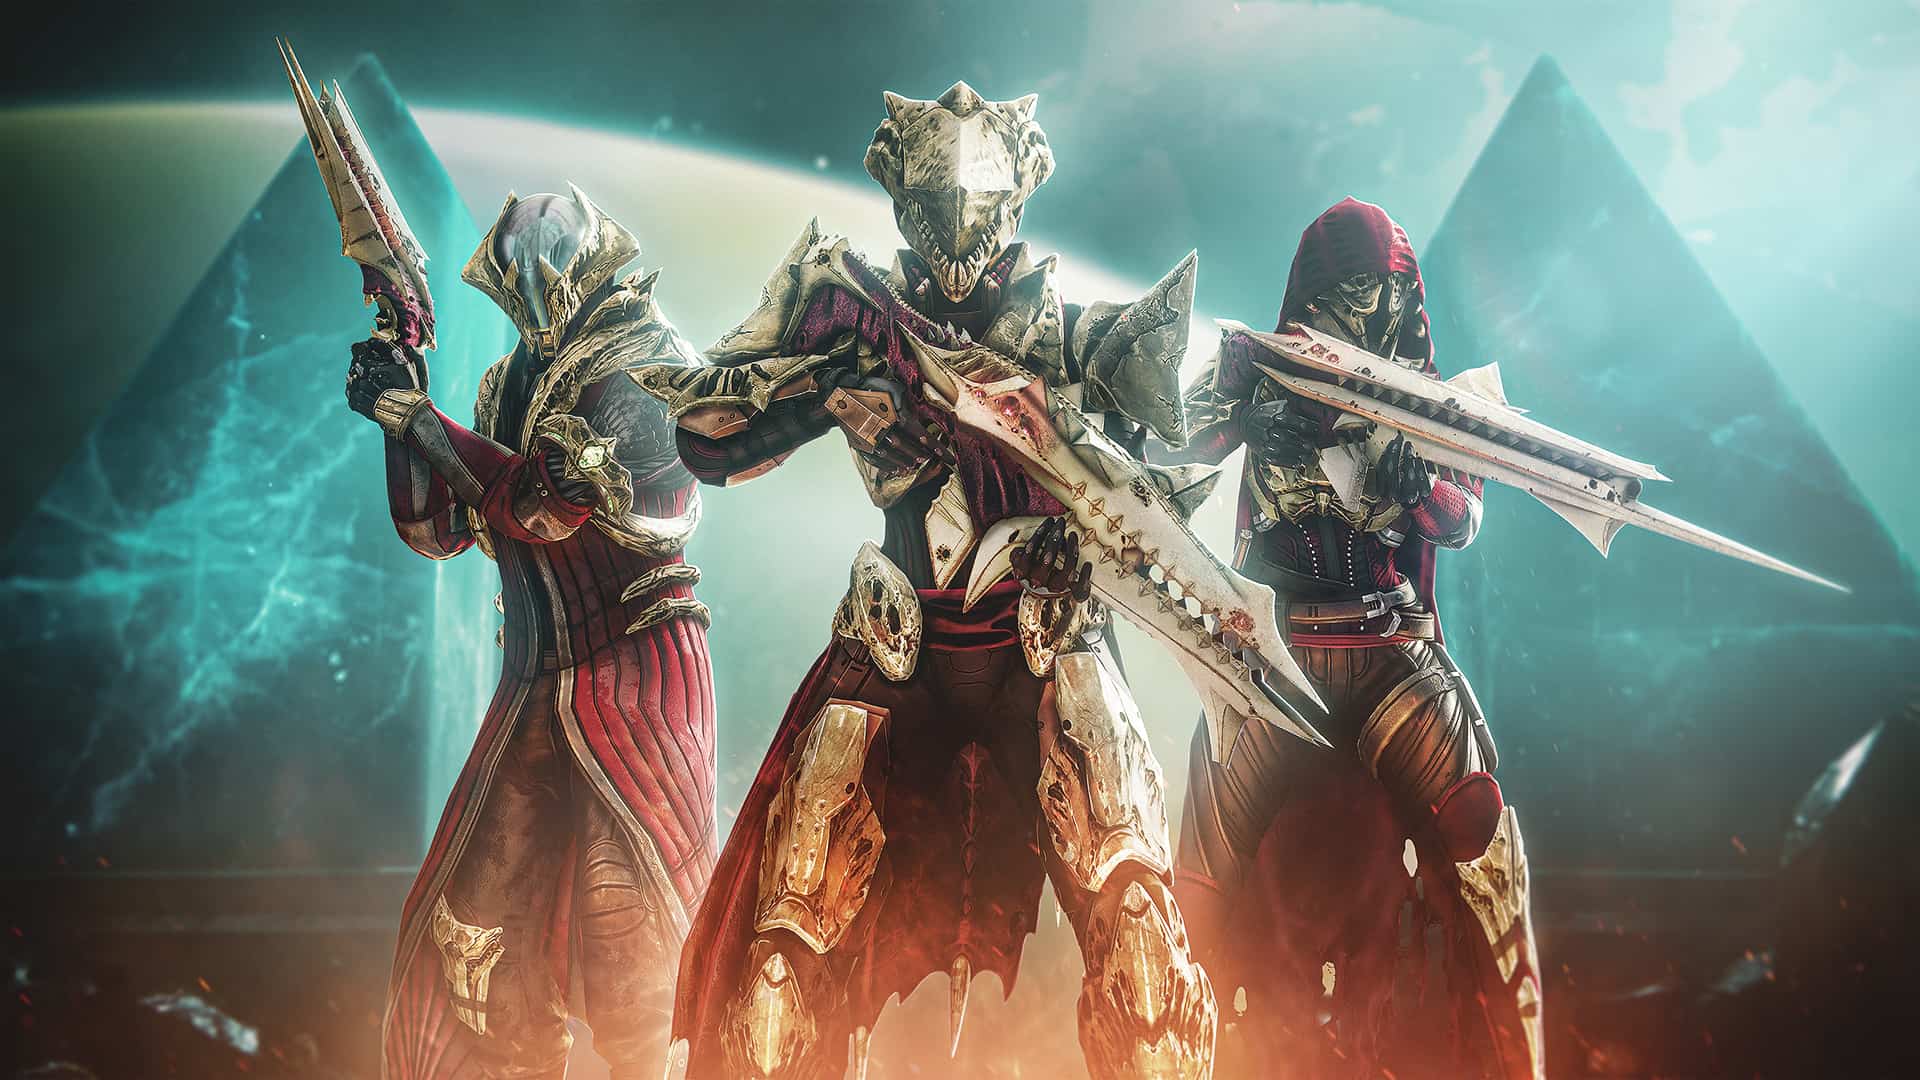 King's Fall Armor featured Destiny 2